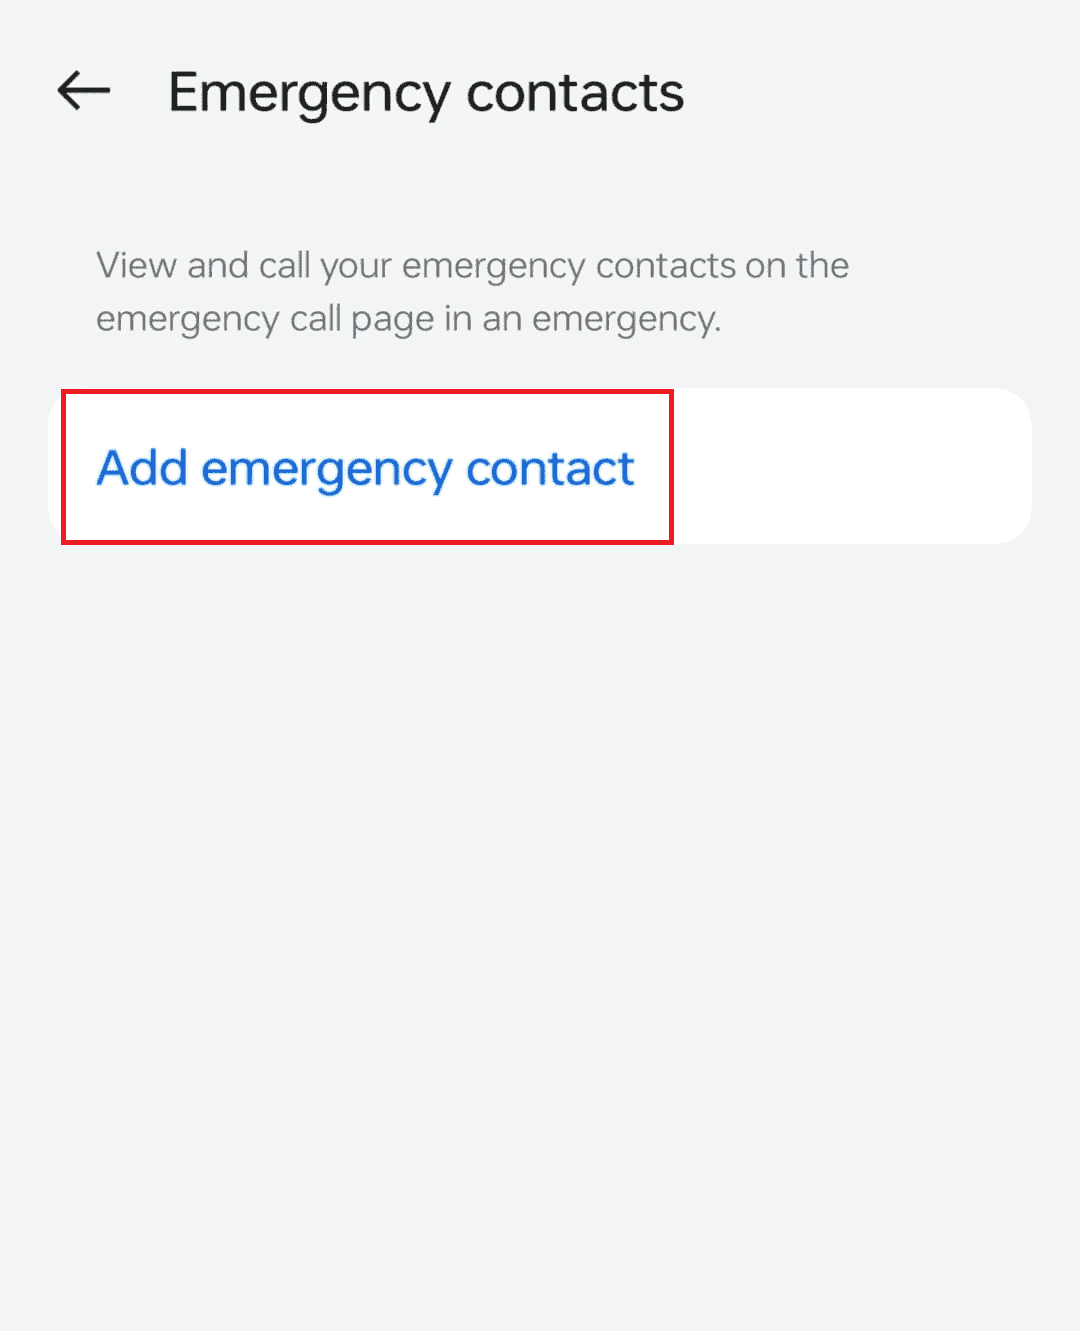 Tap on add emergency contact